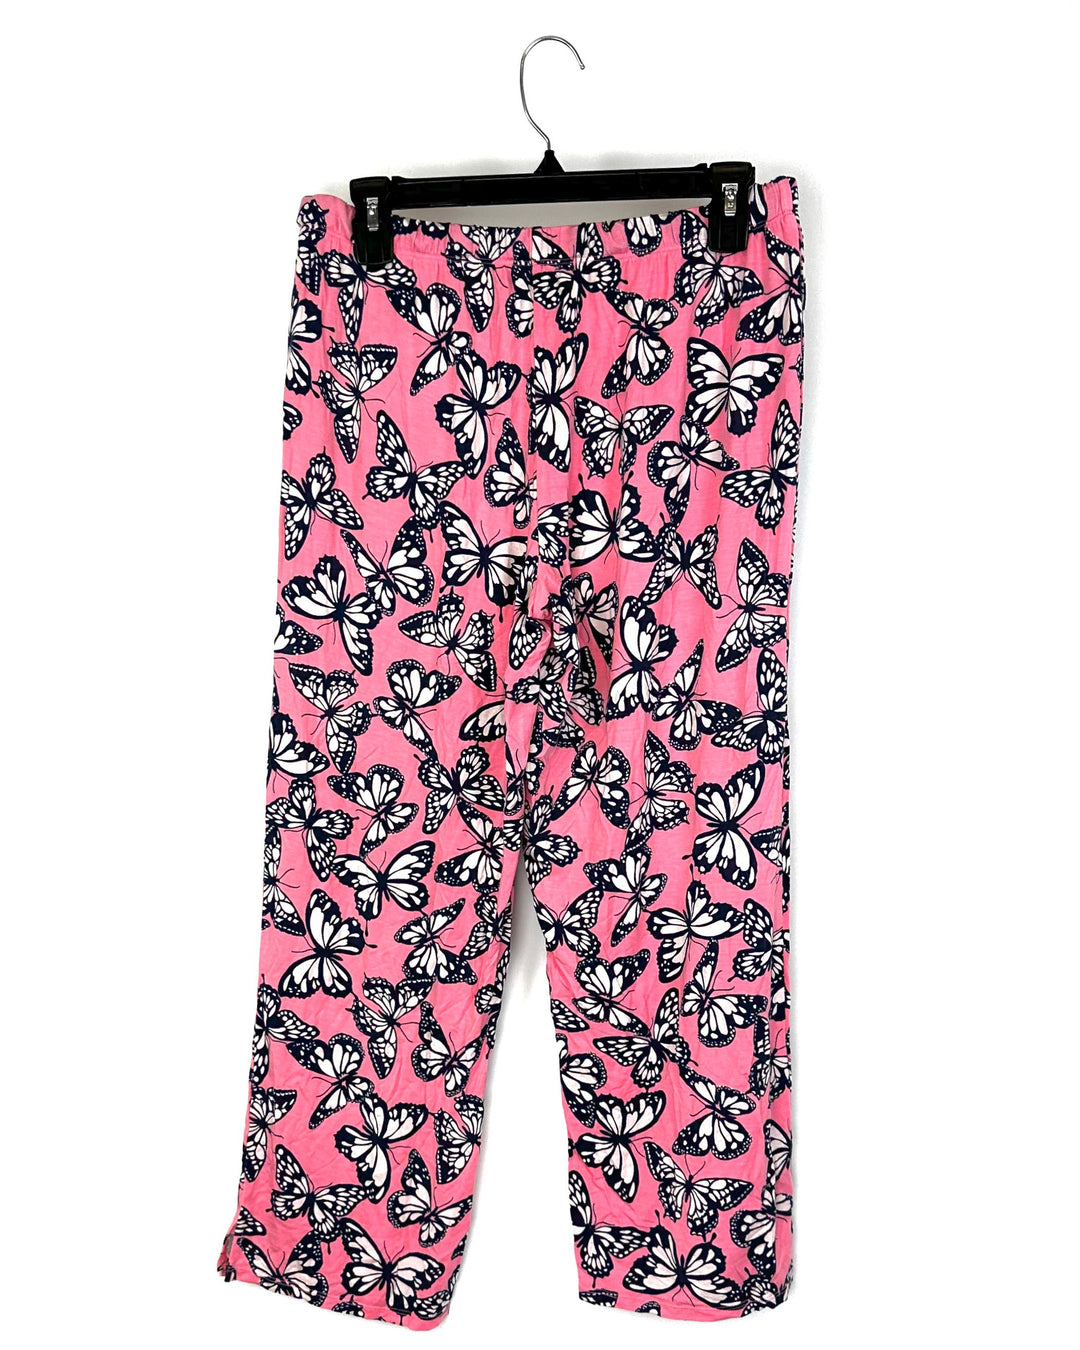 Pink Butterfly Pajama Pant Set - Small